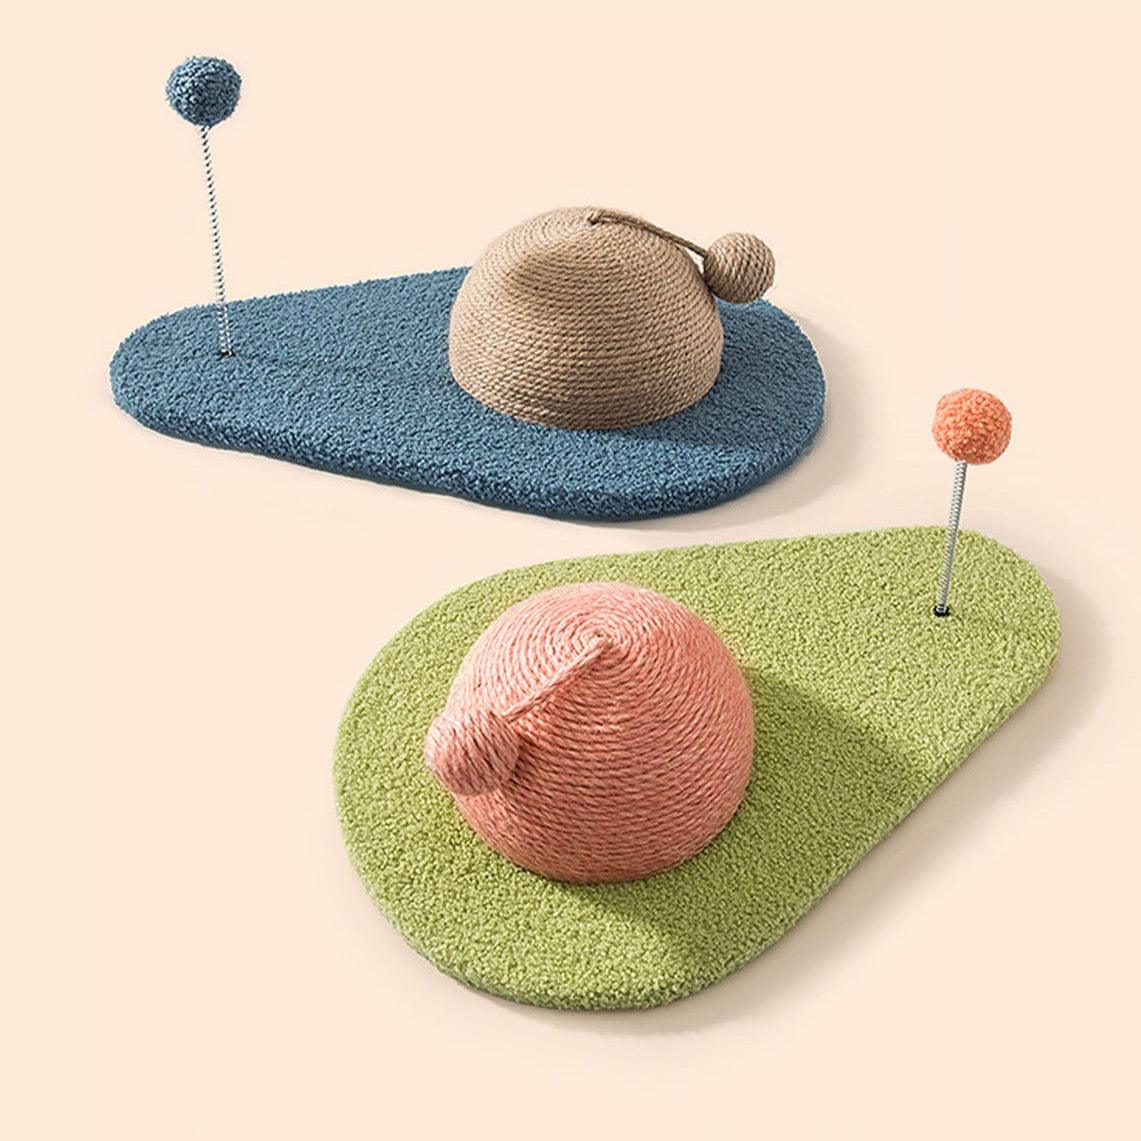 Don's Avocado, Cat Toy, Hemp Rope-Weilai concept-Weilai concept